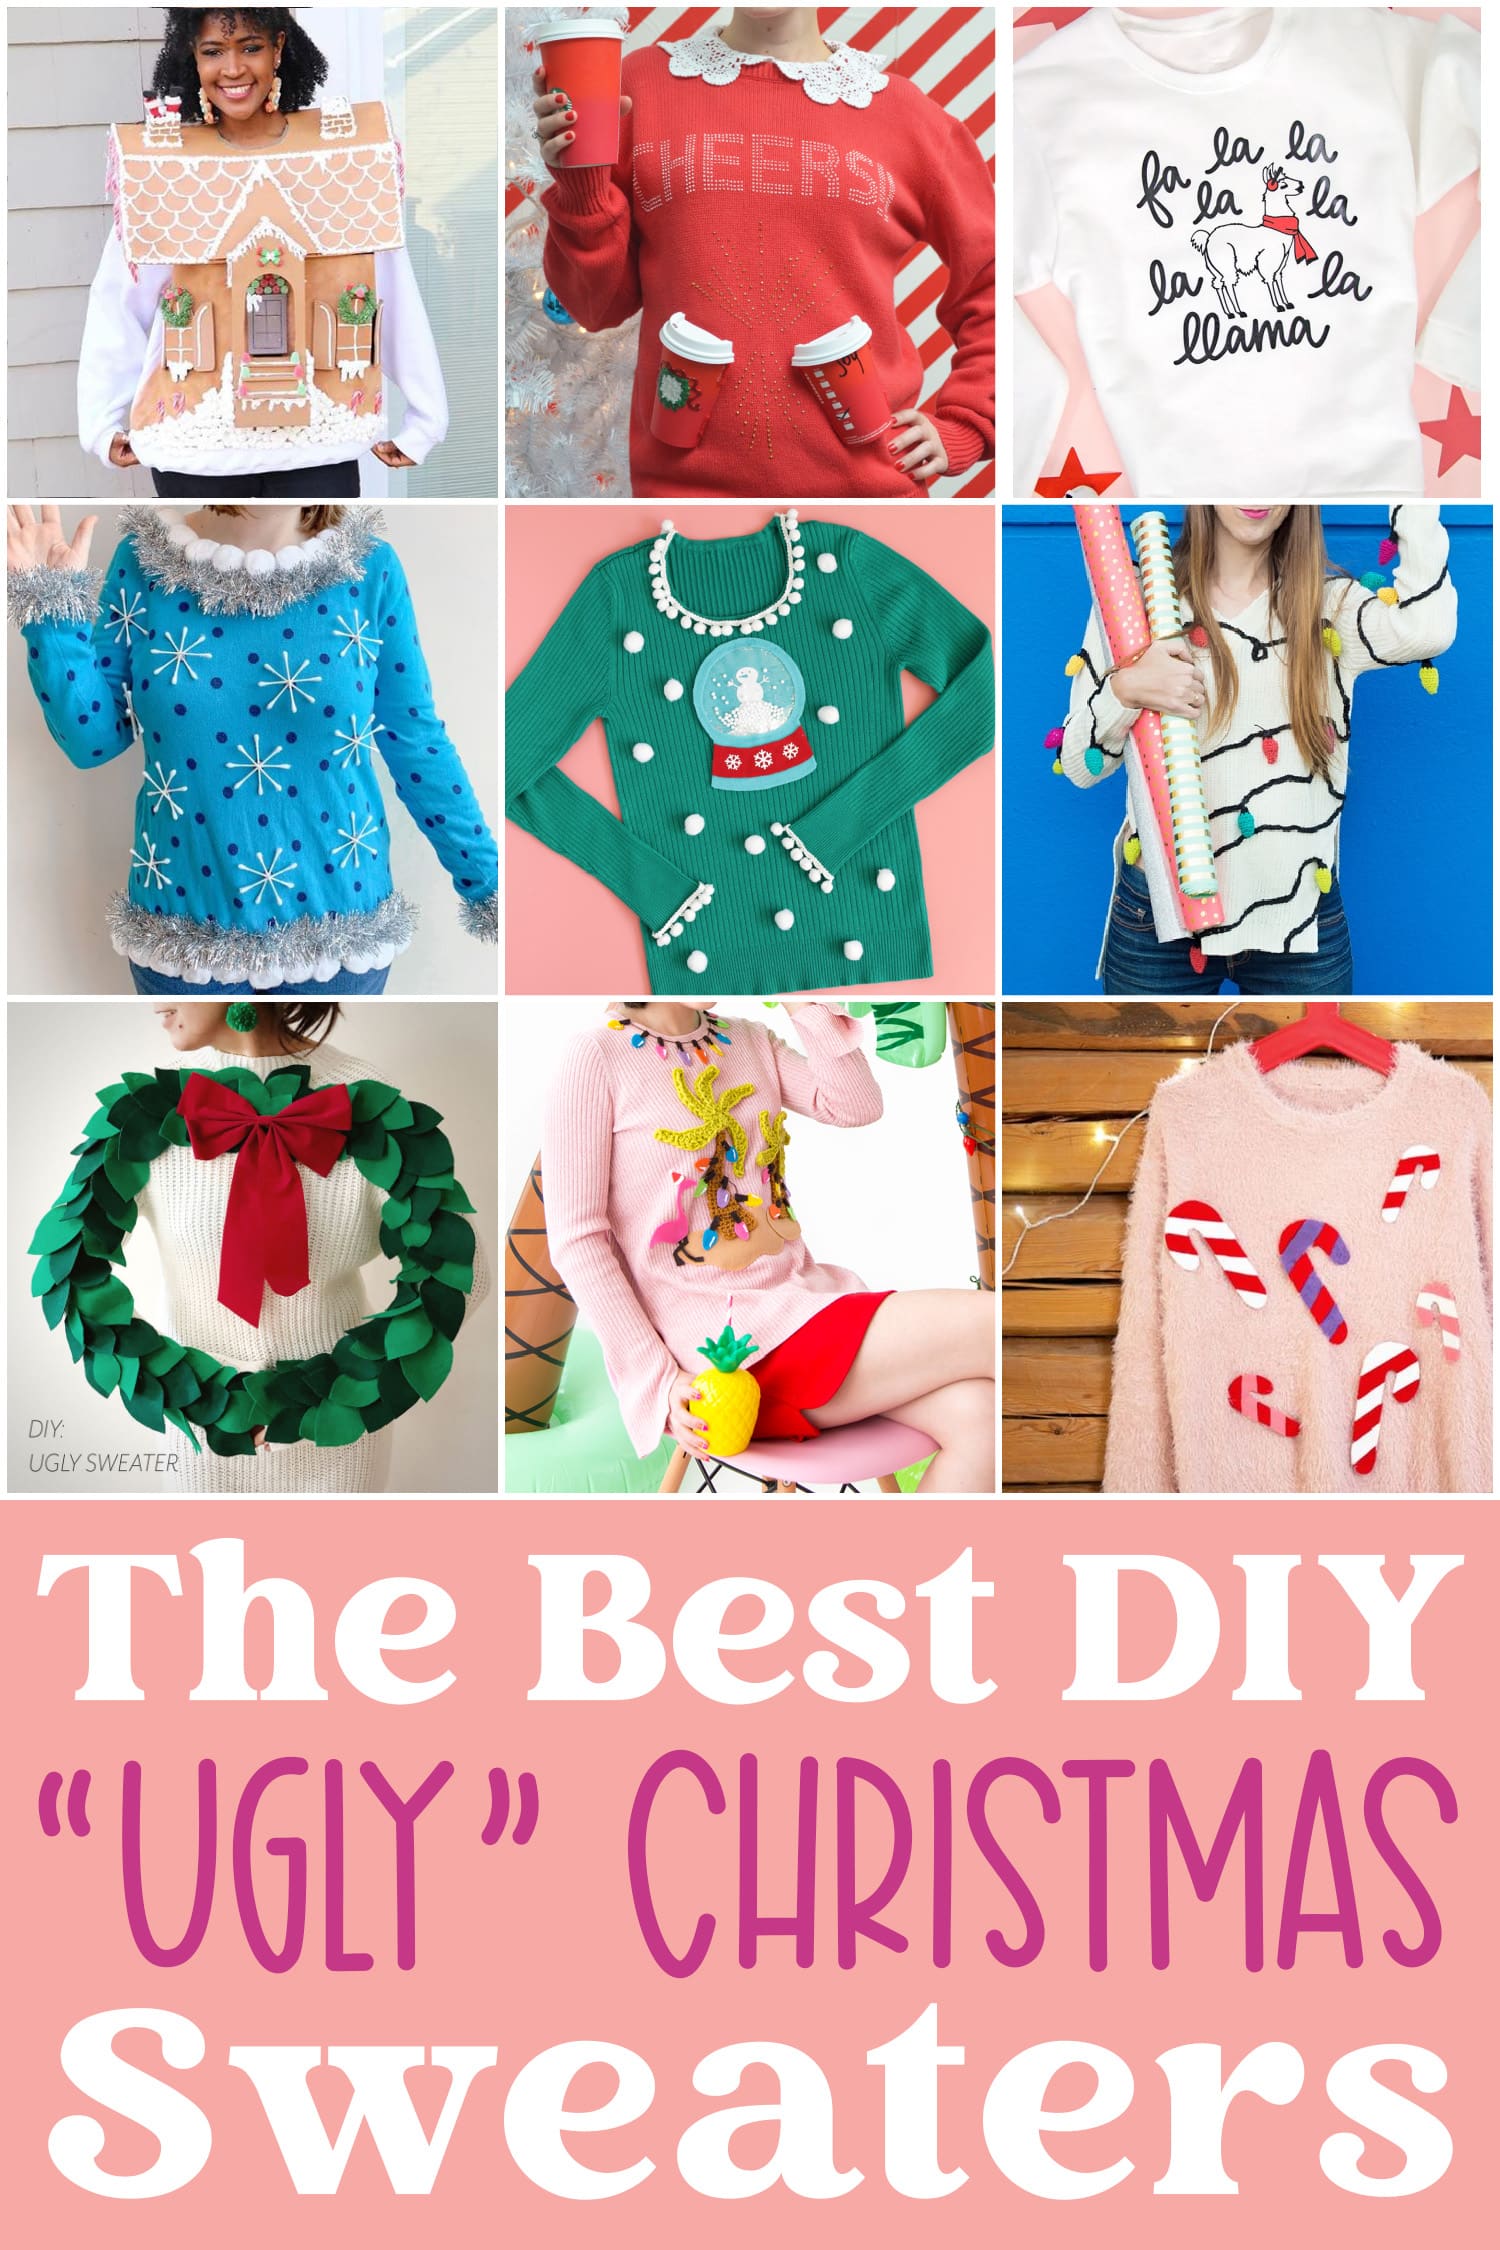 https://www.happinessishomemade.net/wp-content/uploads/2022/12/The-Best-Ugly-Christmas-Sweaters-DIY.jpg